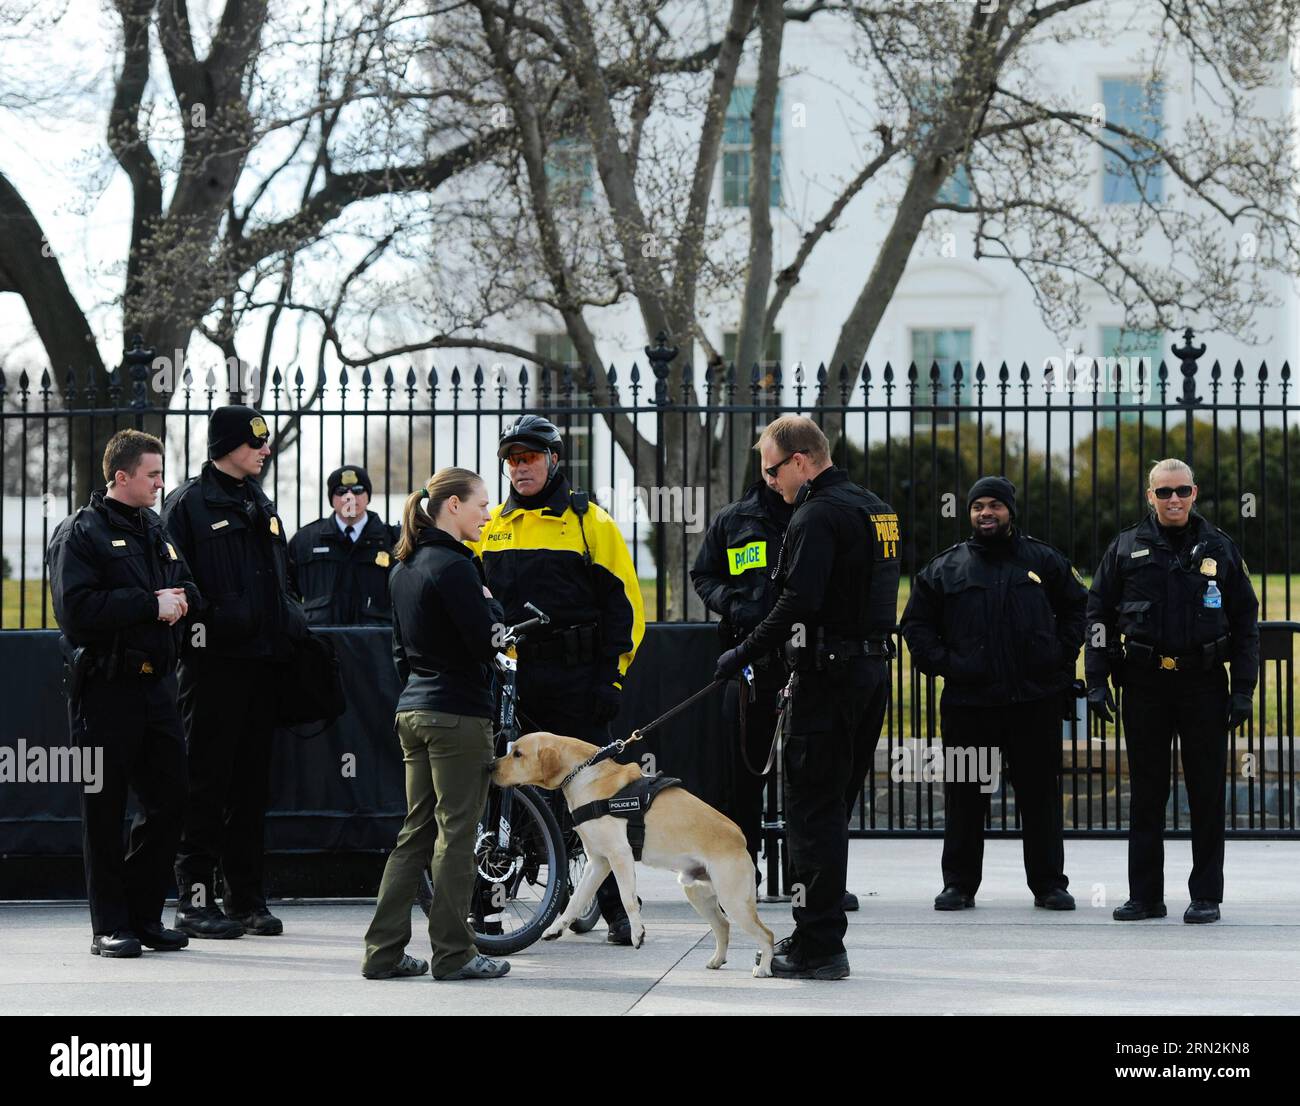 (150313) -- WASHINGTON D.C., March 13, 2015 -- Secret service agents guard the White House in Washington D.C., capital of the United States, March 13, 2015. For a U.S. federal agency with a name that suggests secrecy, putting itself repeatedly in the limelight for negative news coverage is quite a bitter irony. The Secret Service, widely perceived as the most elite law enforcement team in the United States that protects the U.S. president and the First Family, landed itself in hot water again after U.S. media revealed earlier this week that two top Secret Service barreled through a scene of an Stock Photo